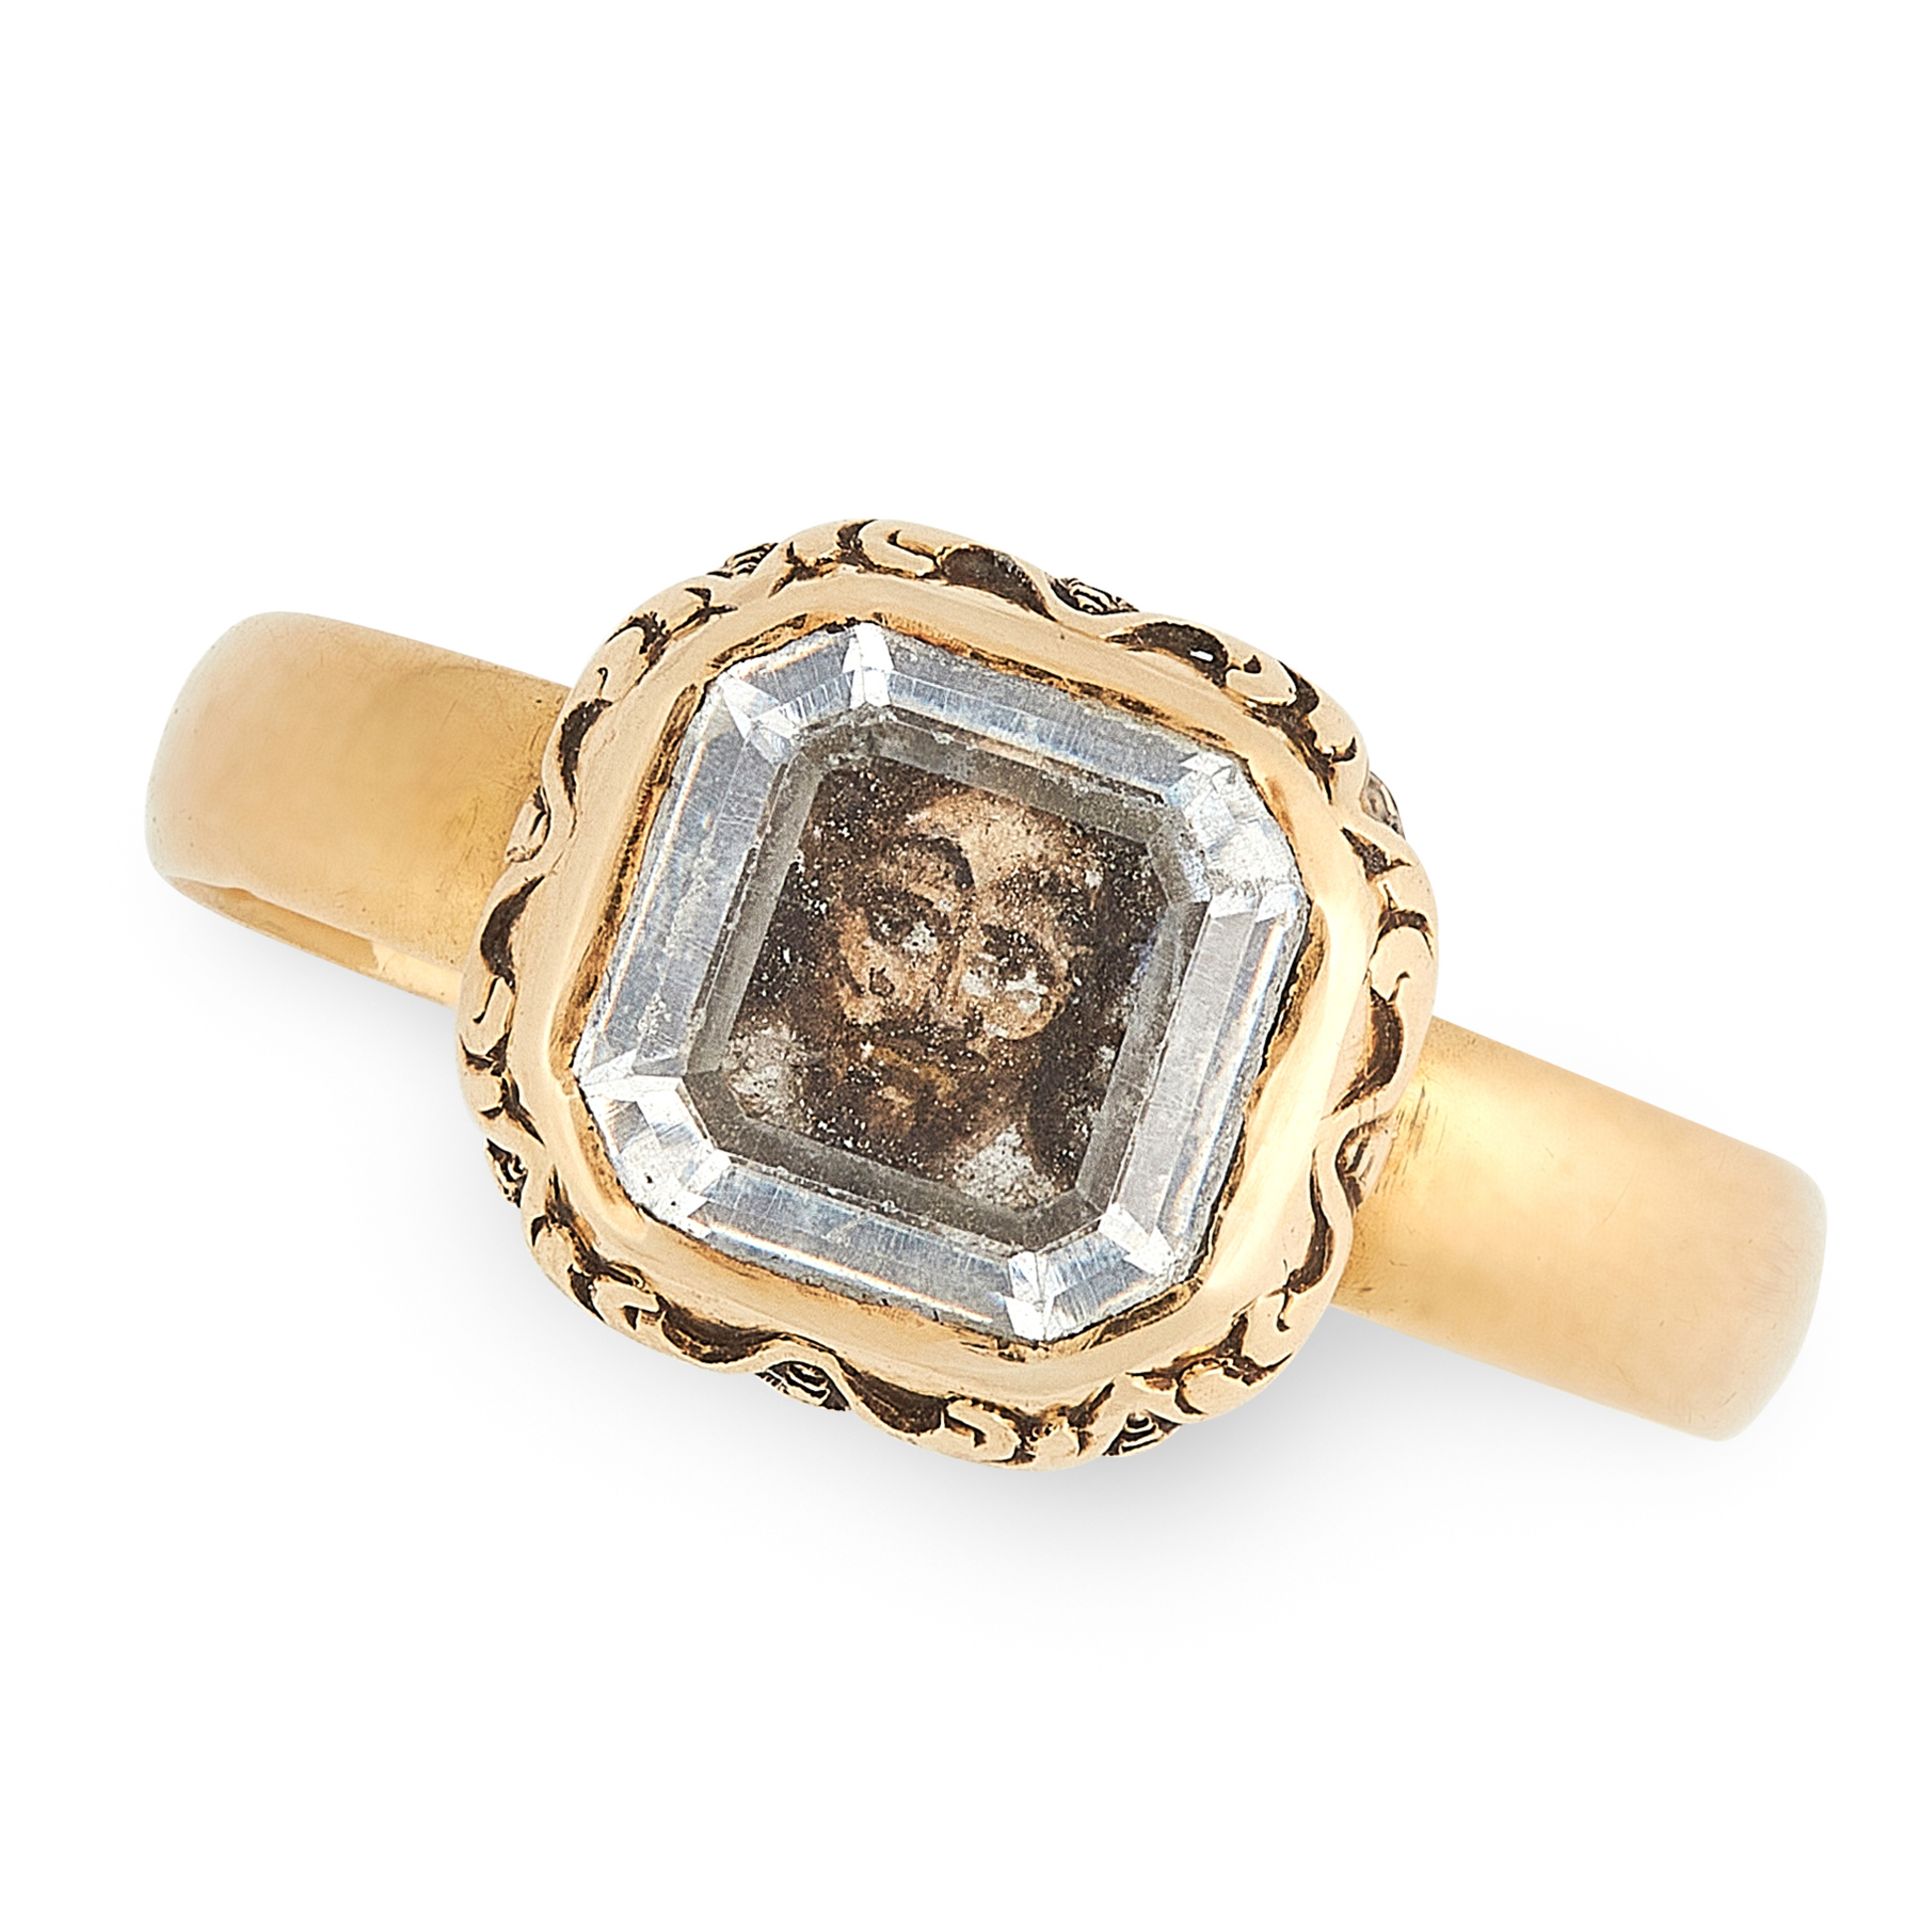 ANTIQUE STUART CRYSTAL MEMENTO PORTRAIT MINIATURE RING, 17TH CENTURY in yellow gold, set with a